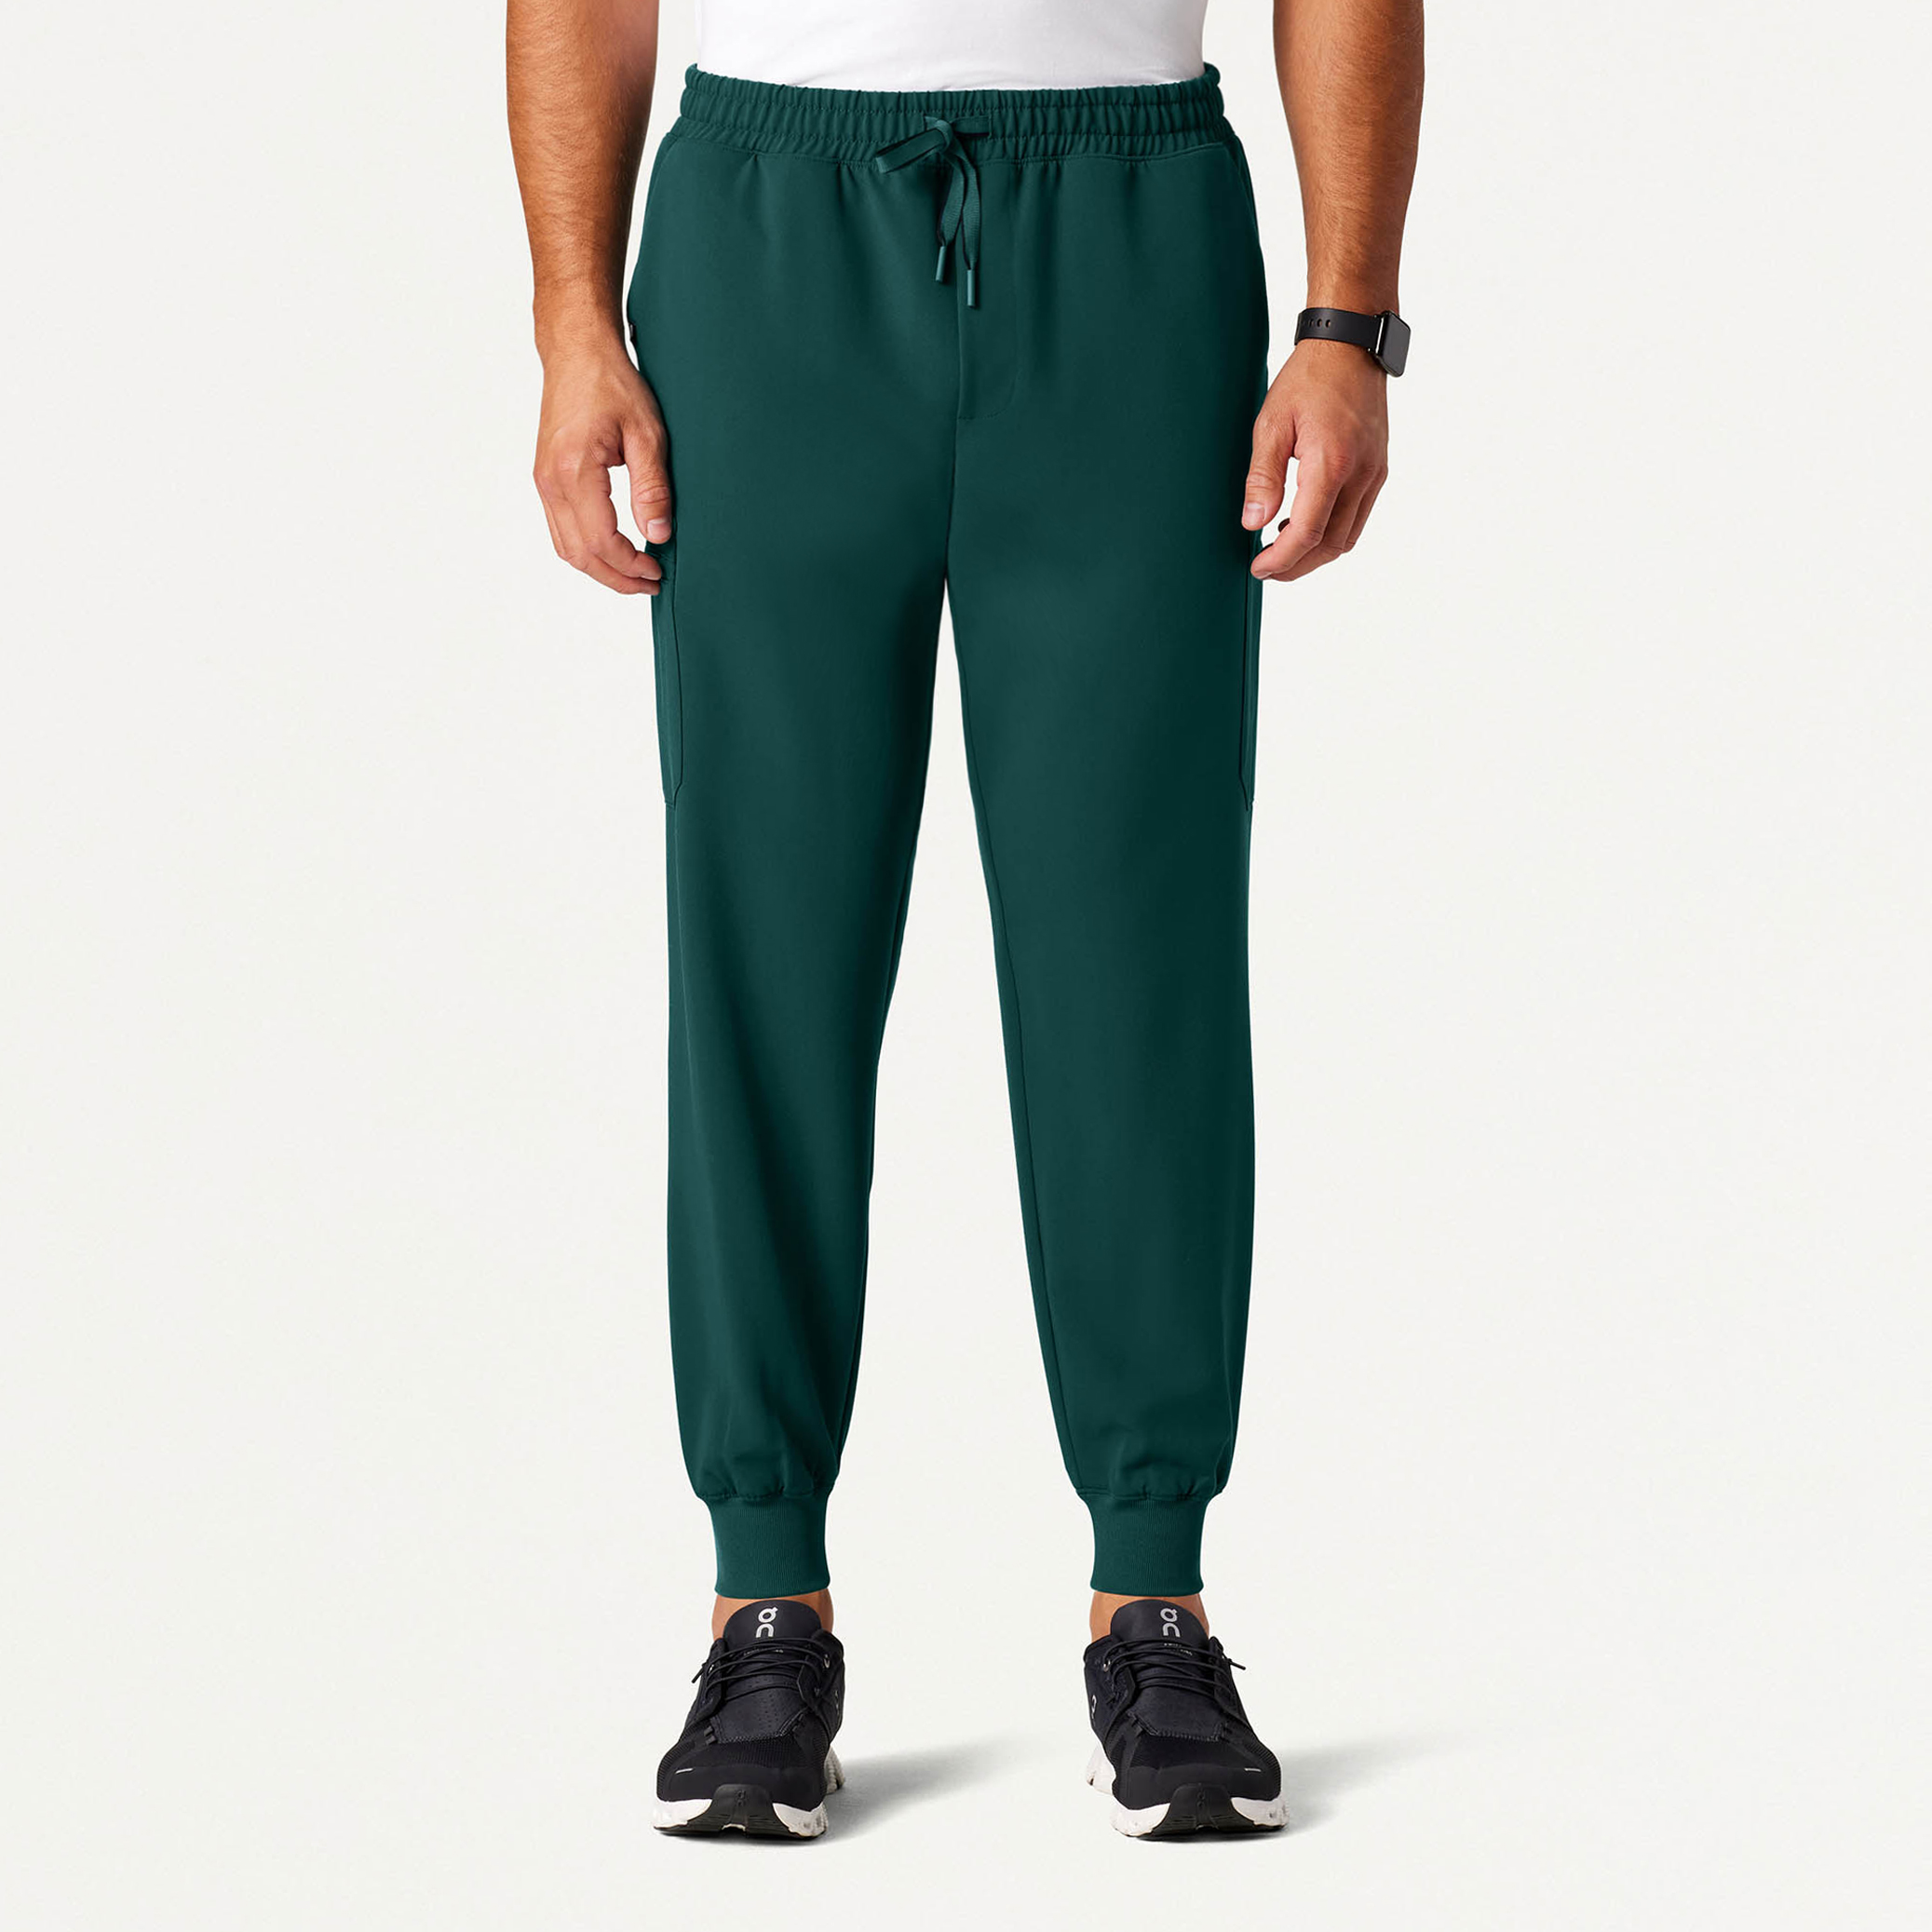 Osmo Classic Scrub Jogger in Black - Men's Pants by Jaanuu